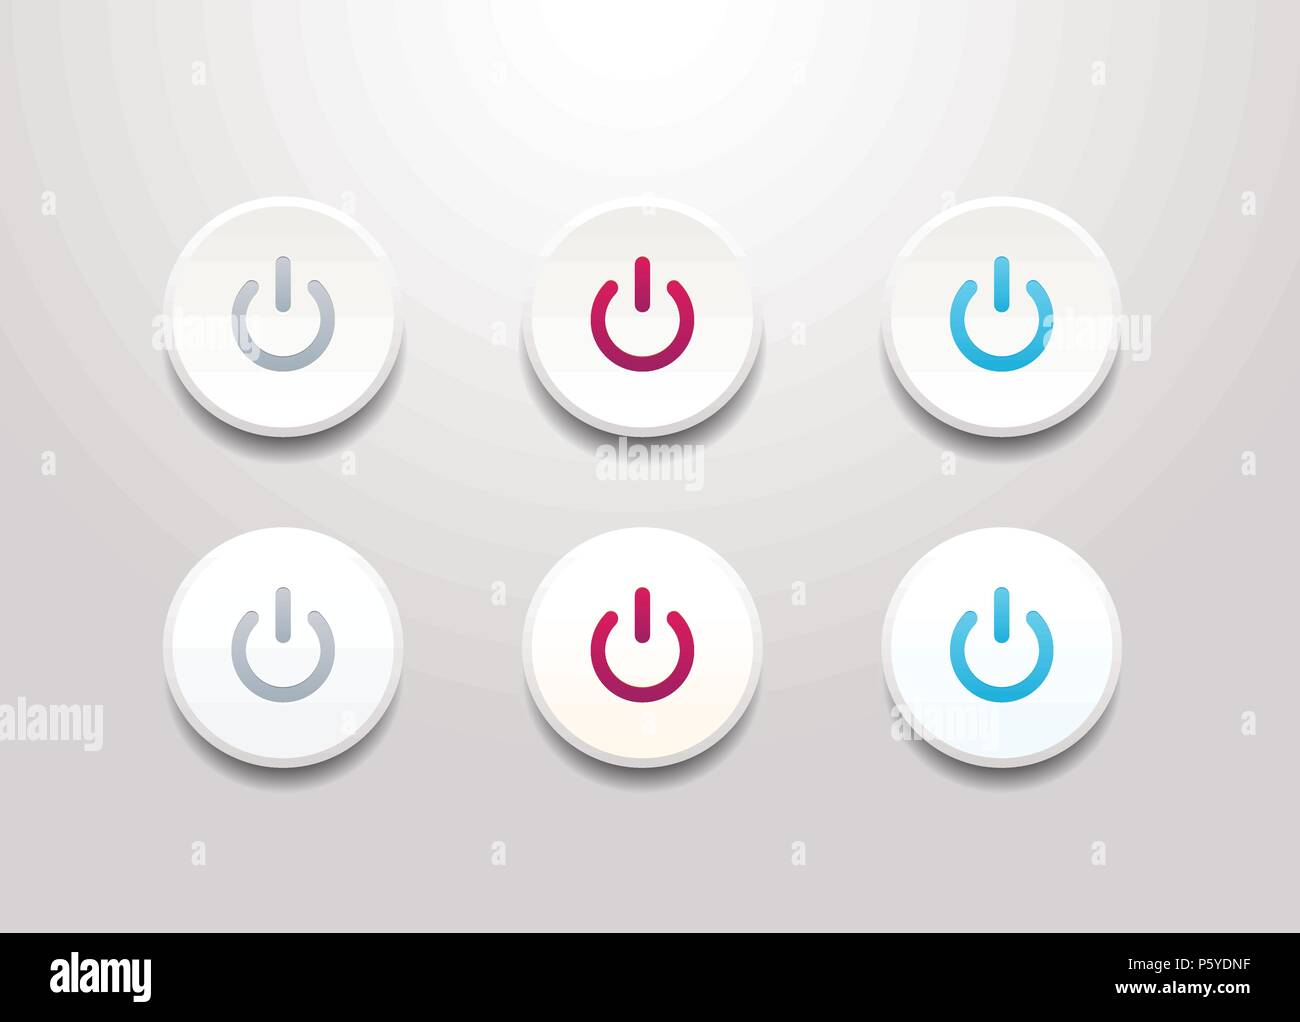 Power button icon set - simple flat design isolated on white background Stock Vector